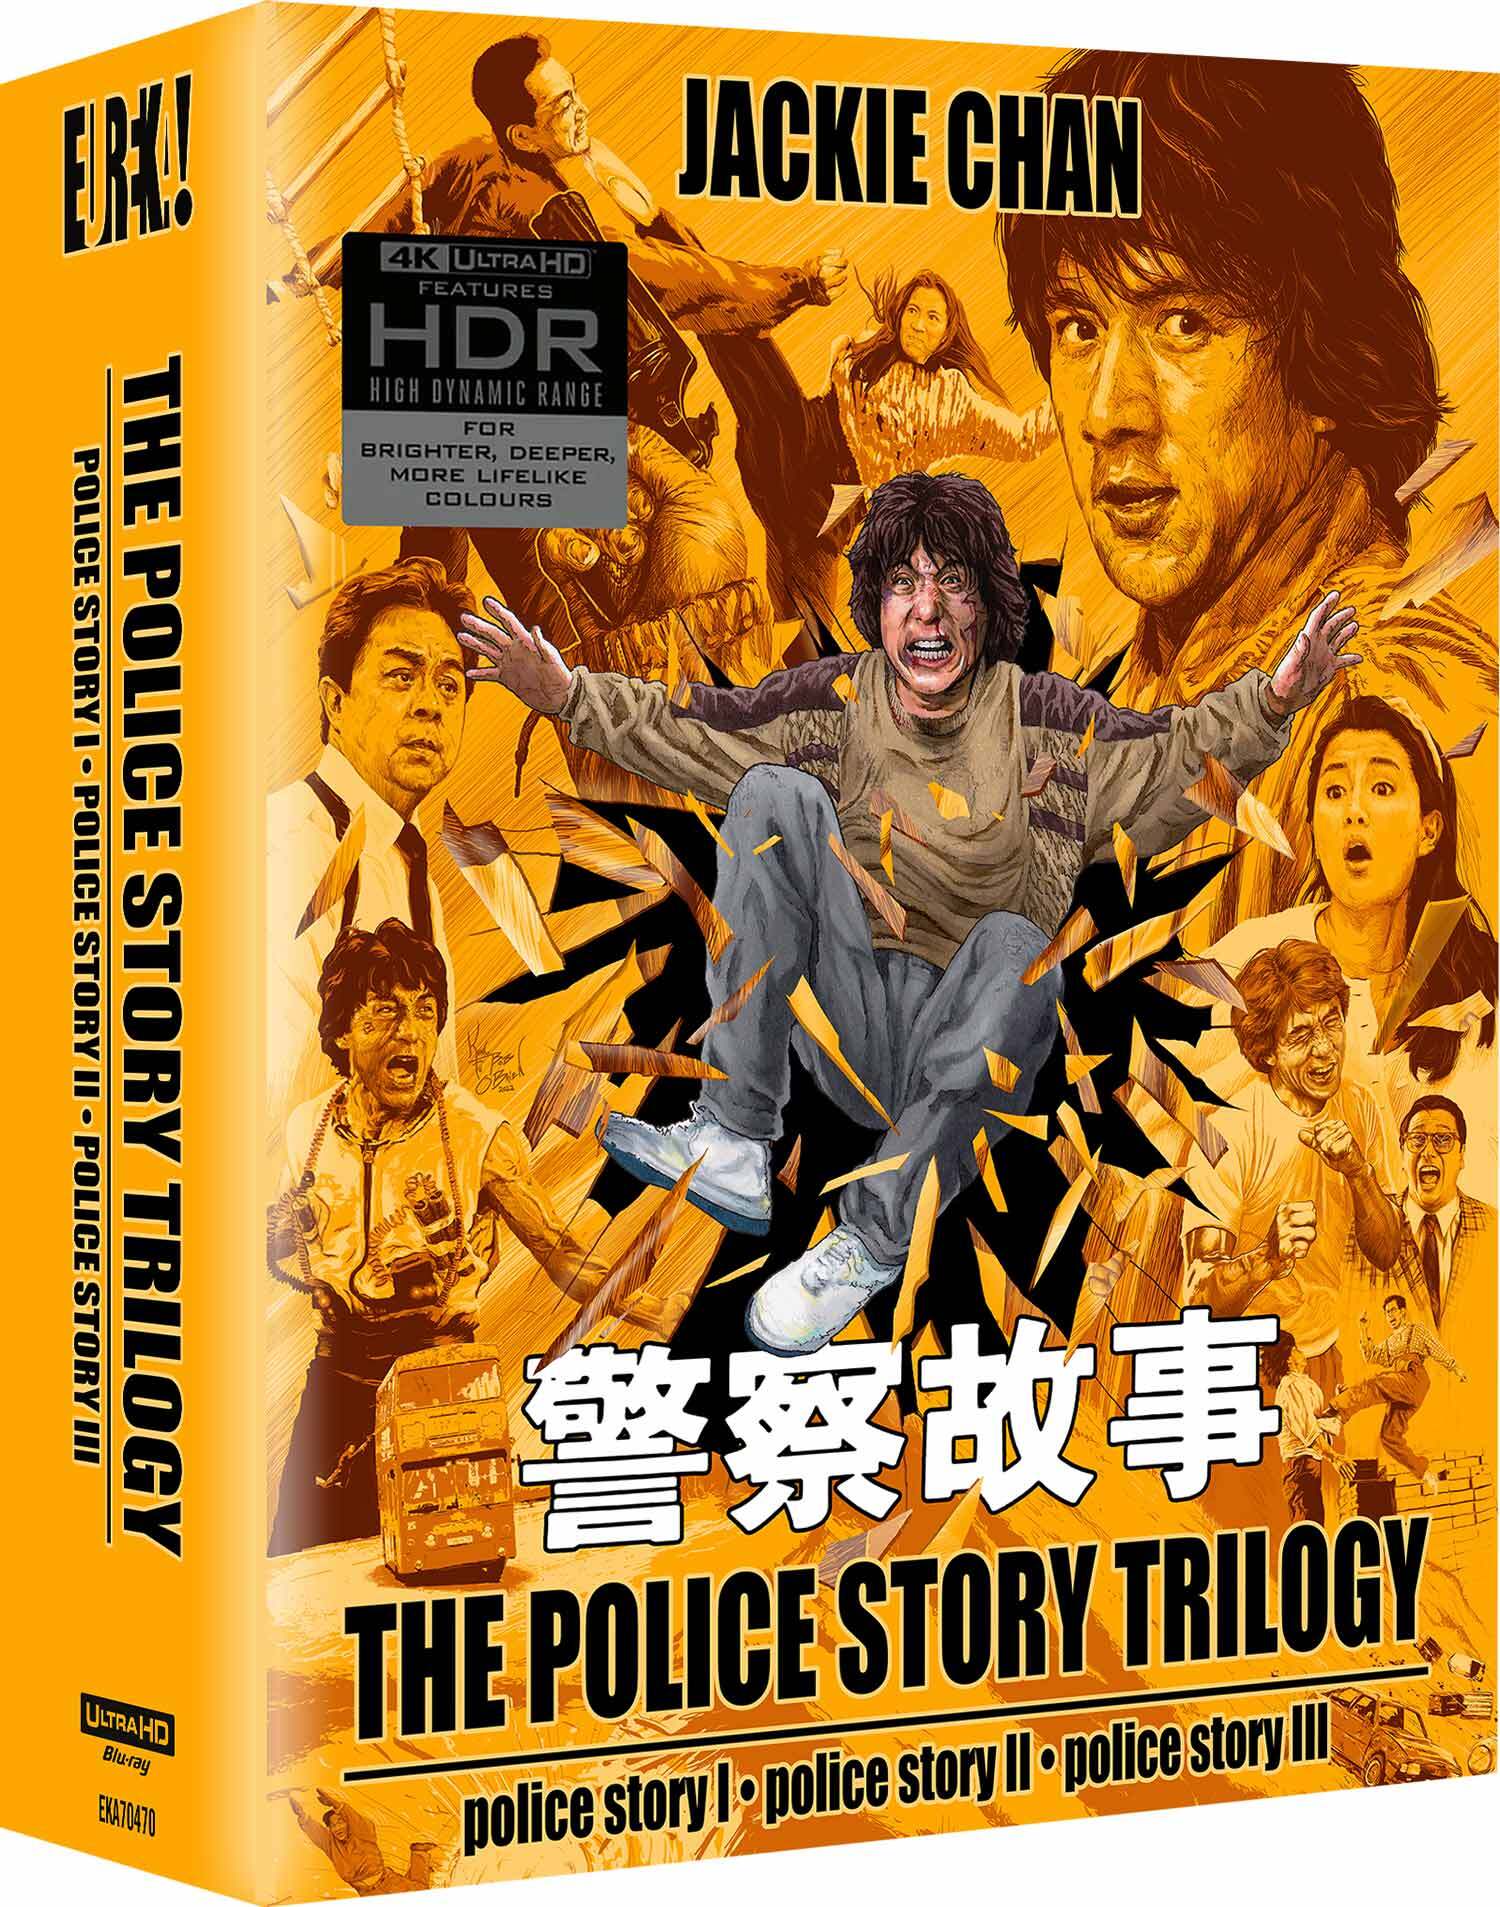 THE POLICE STORY TRILOGY (REGION FREE IMPORT - LIMITED EDITION) 4K UHD [SCRATCH AND DENT]